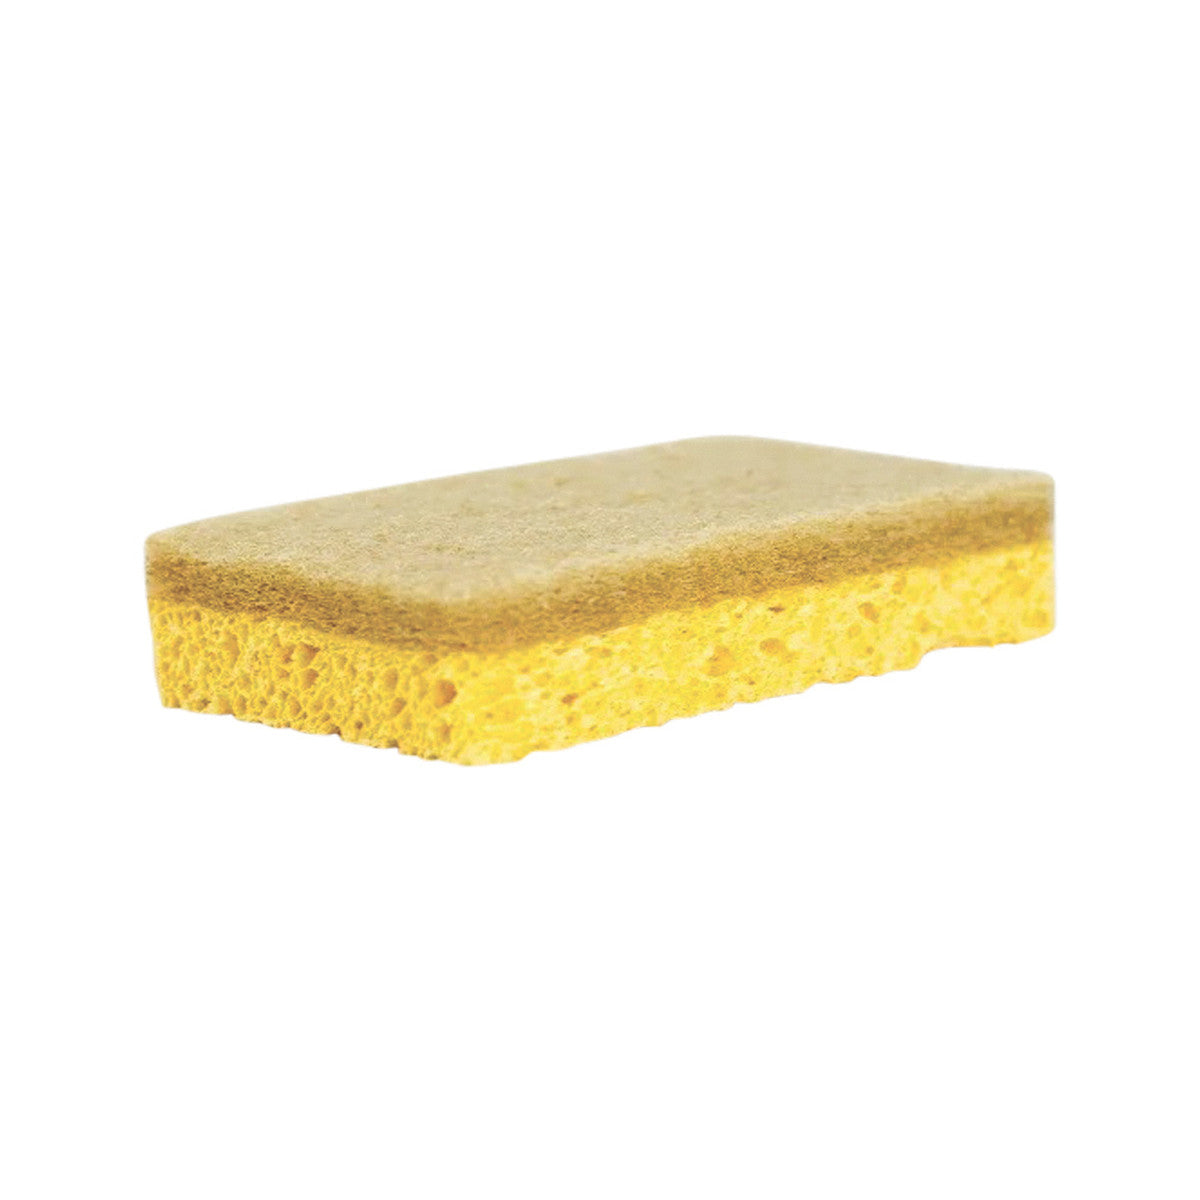 Clover Fields Cellulose Dish Sponge with Coconut or Sisal Scourer